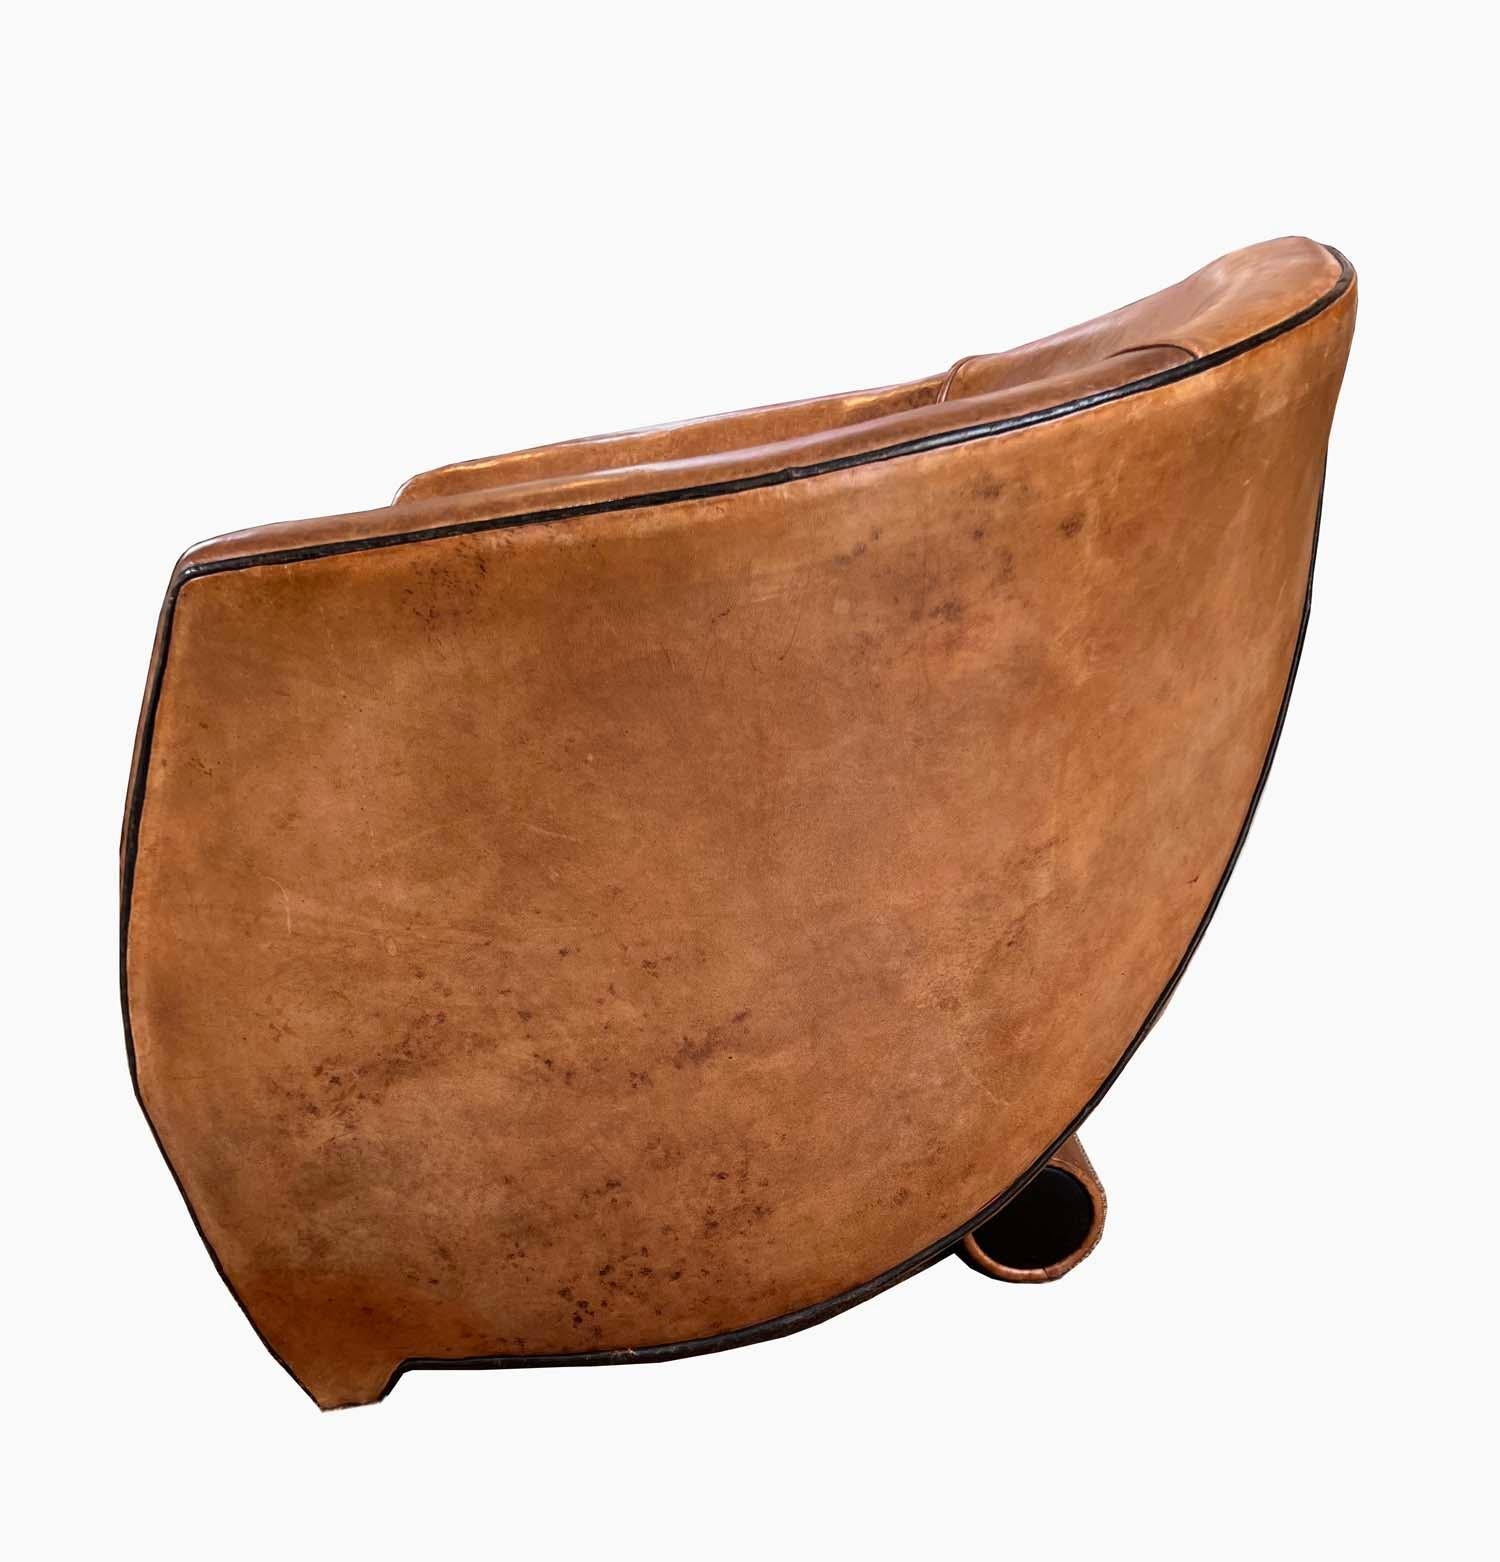 Pair of Bart Van Bekhoven, 'Cocoon' Lounge Chair, Leather, the Netherlands 4